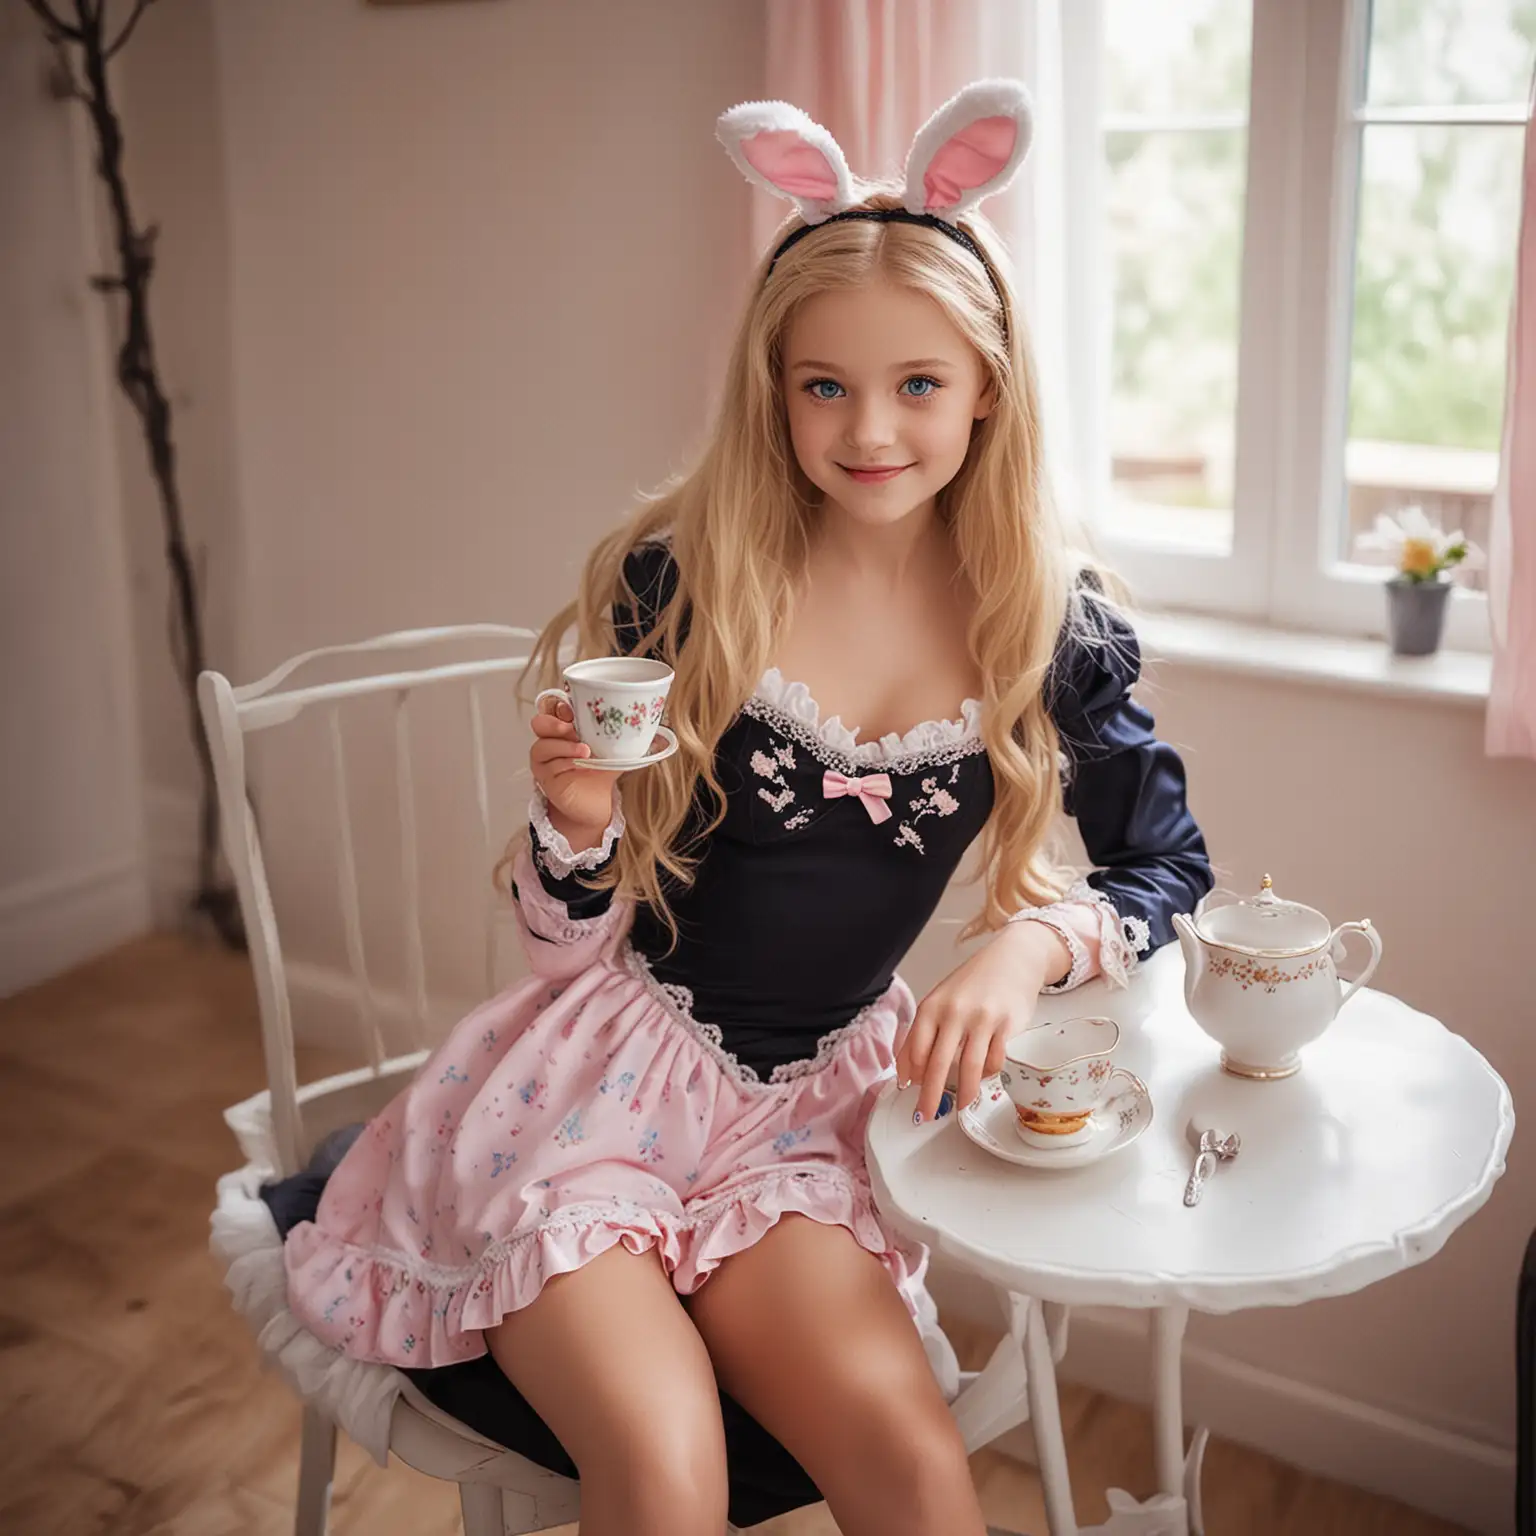 Dreamy Chelsea in Bunny Girl Outfit Sipping Tea